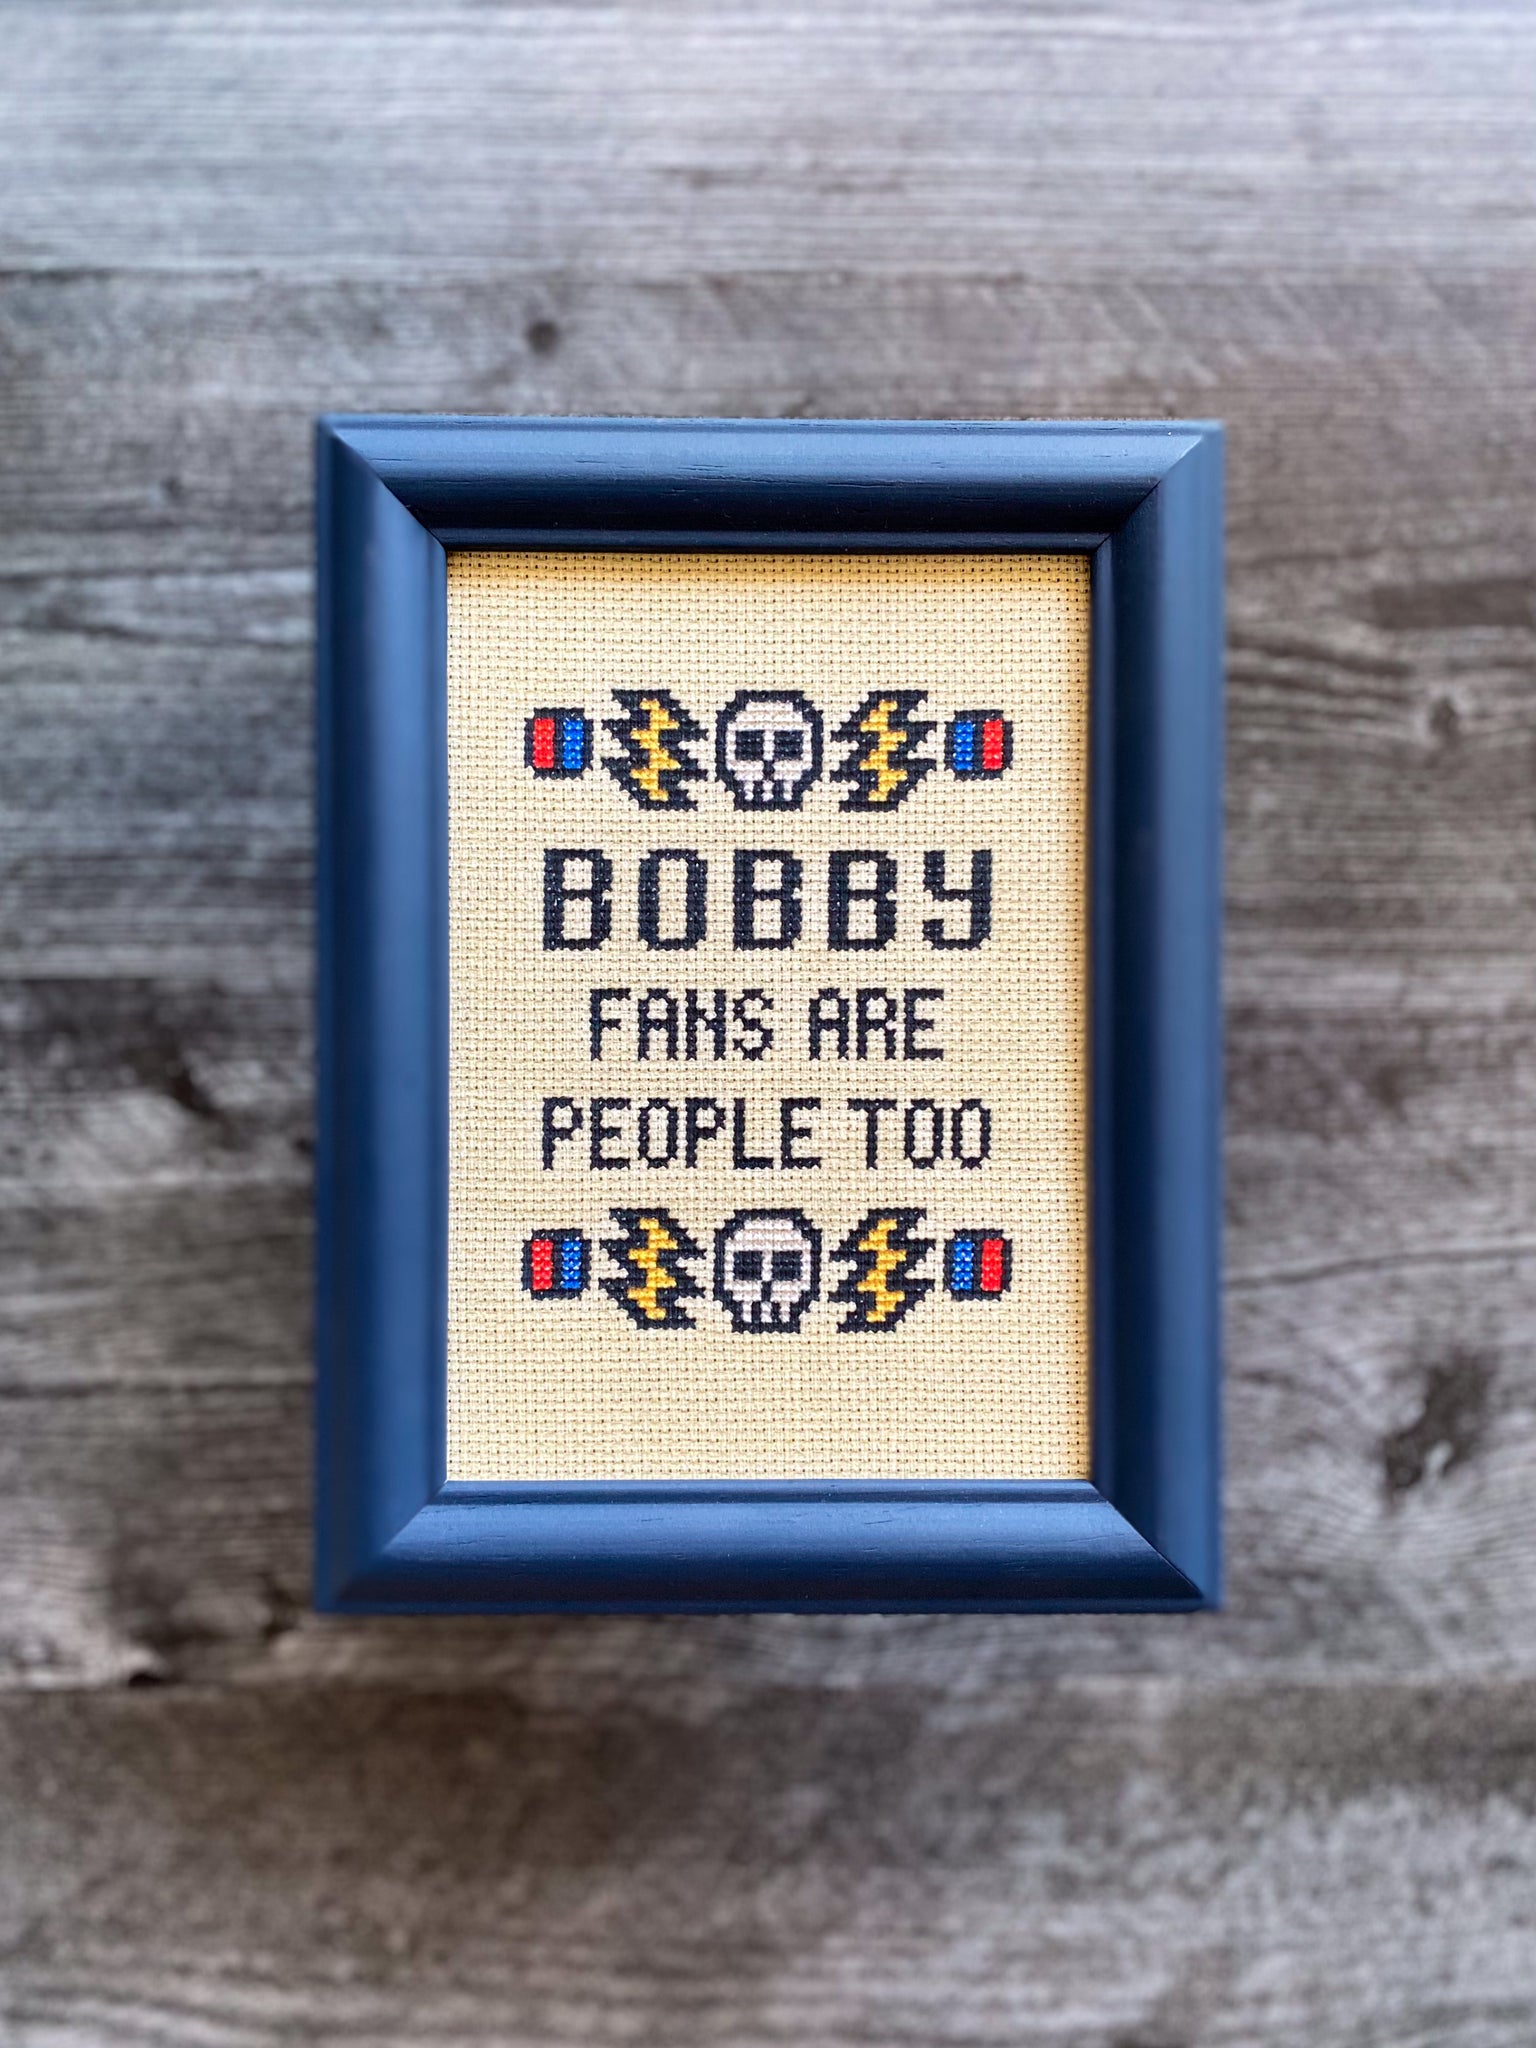 Bobby Fans Are People Too - Cross Stitch Paper Print